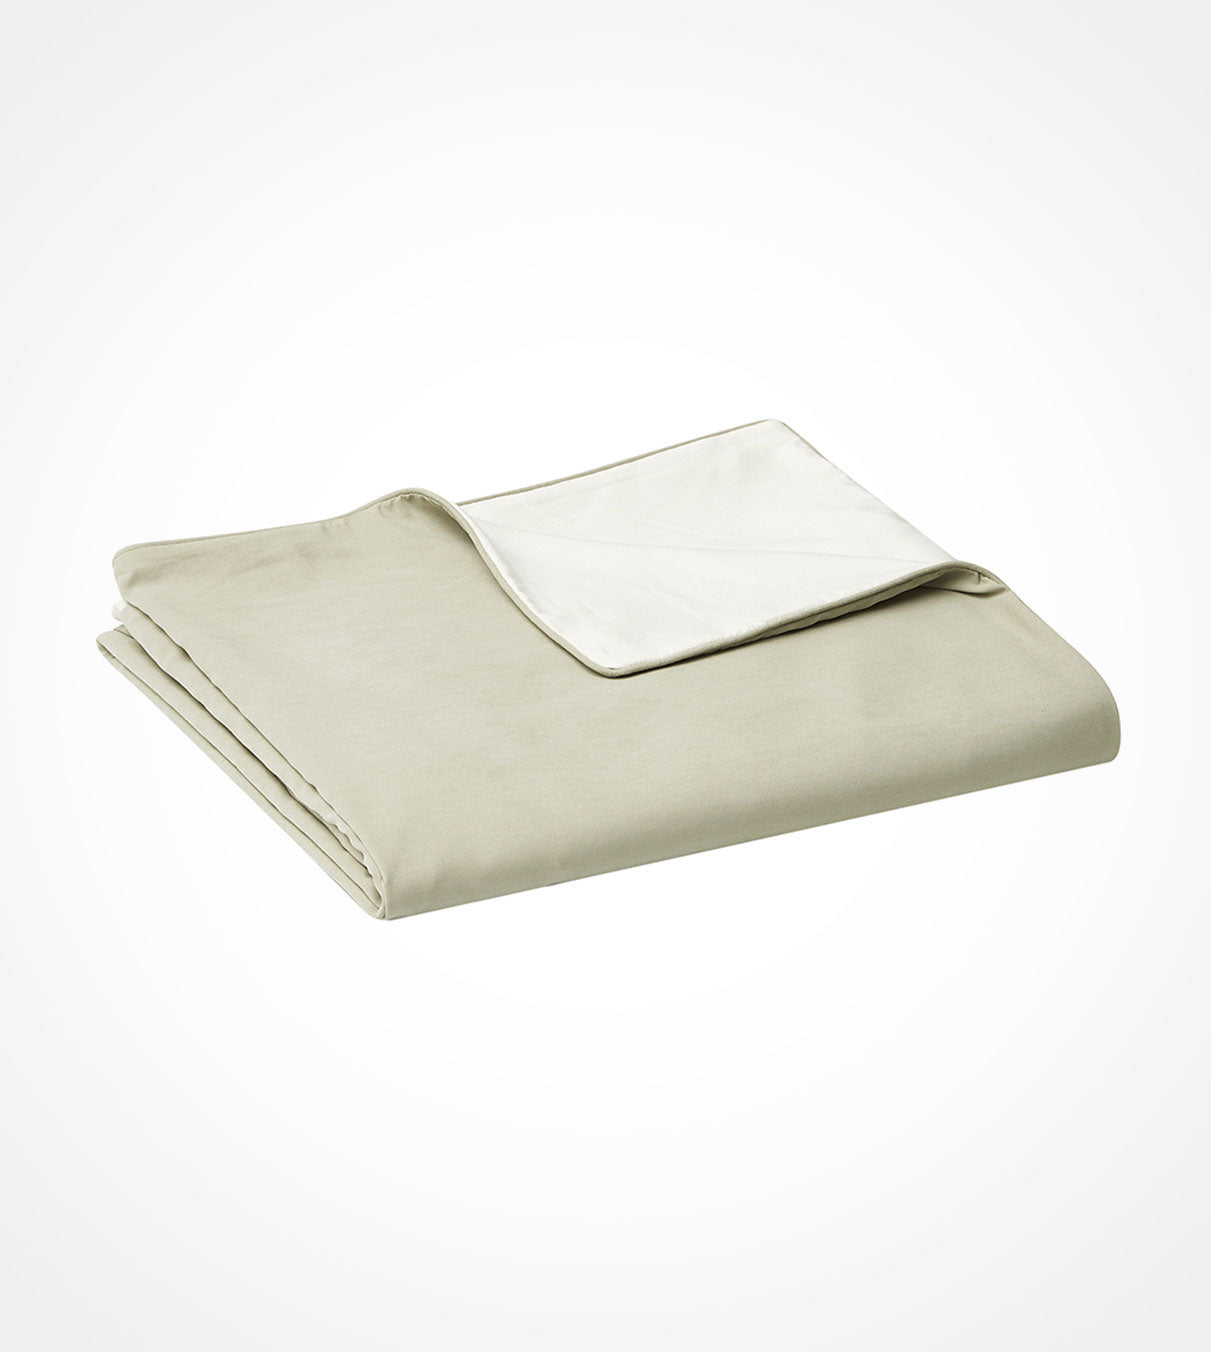 Product: Cotton-Polyester Weighted Blanket Duvet Cover | Color: Reversible Avocado White